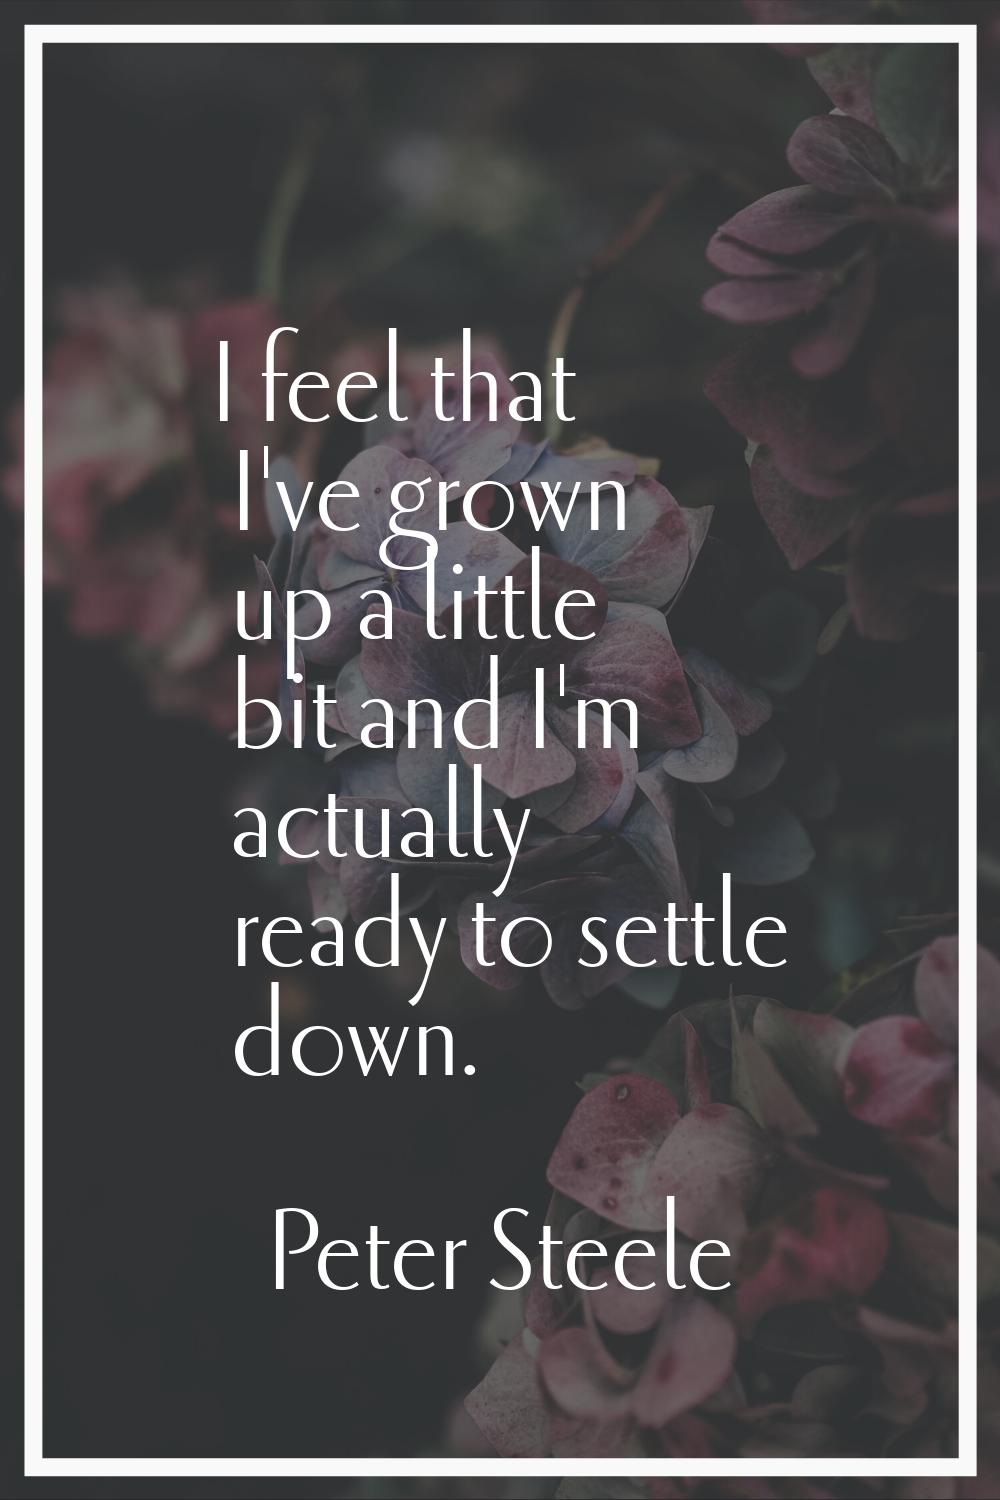 I feel that I've grown up a little bit and I'm actually ready to settle down.